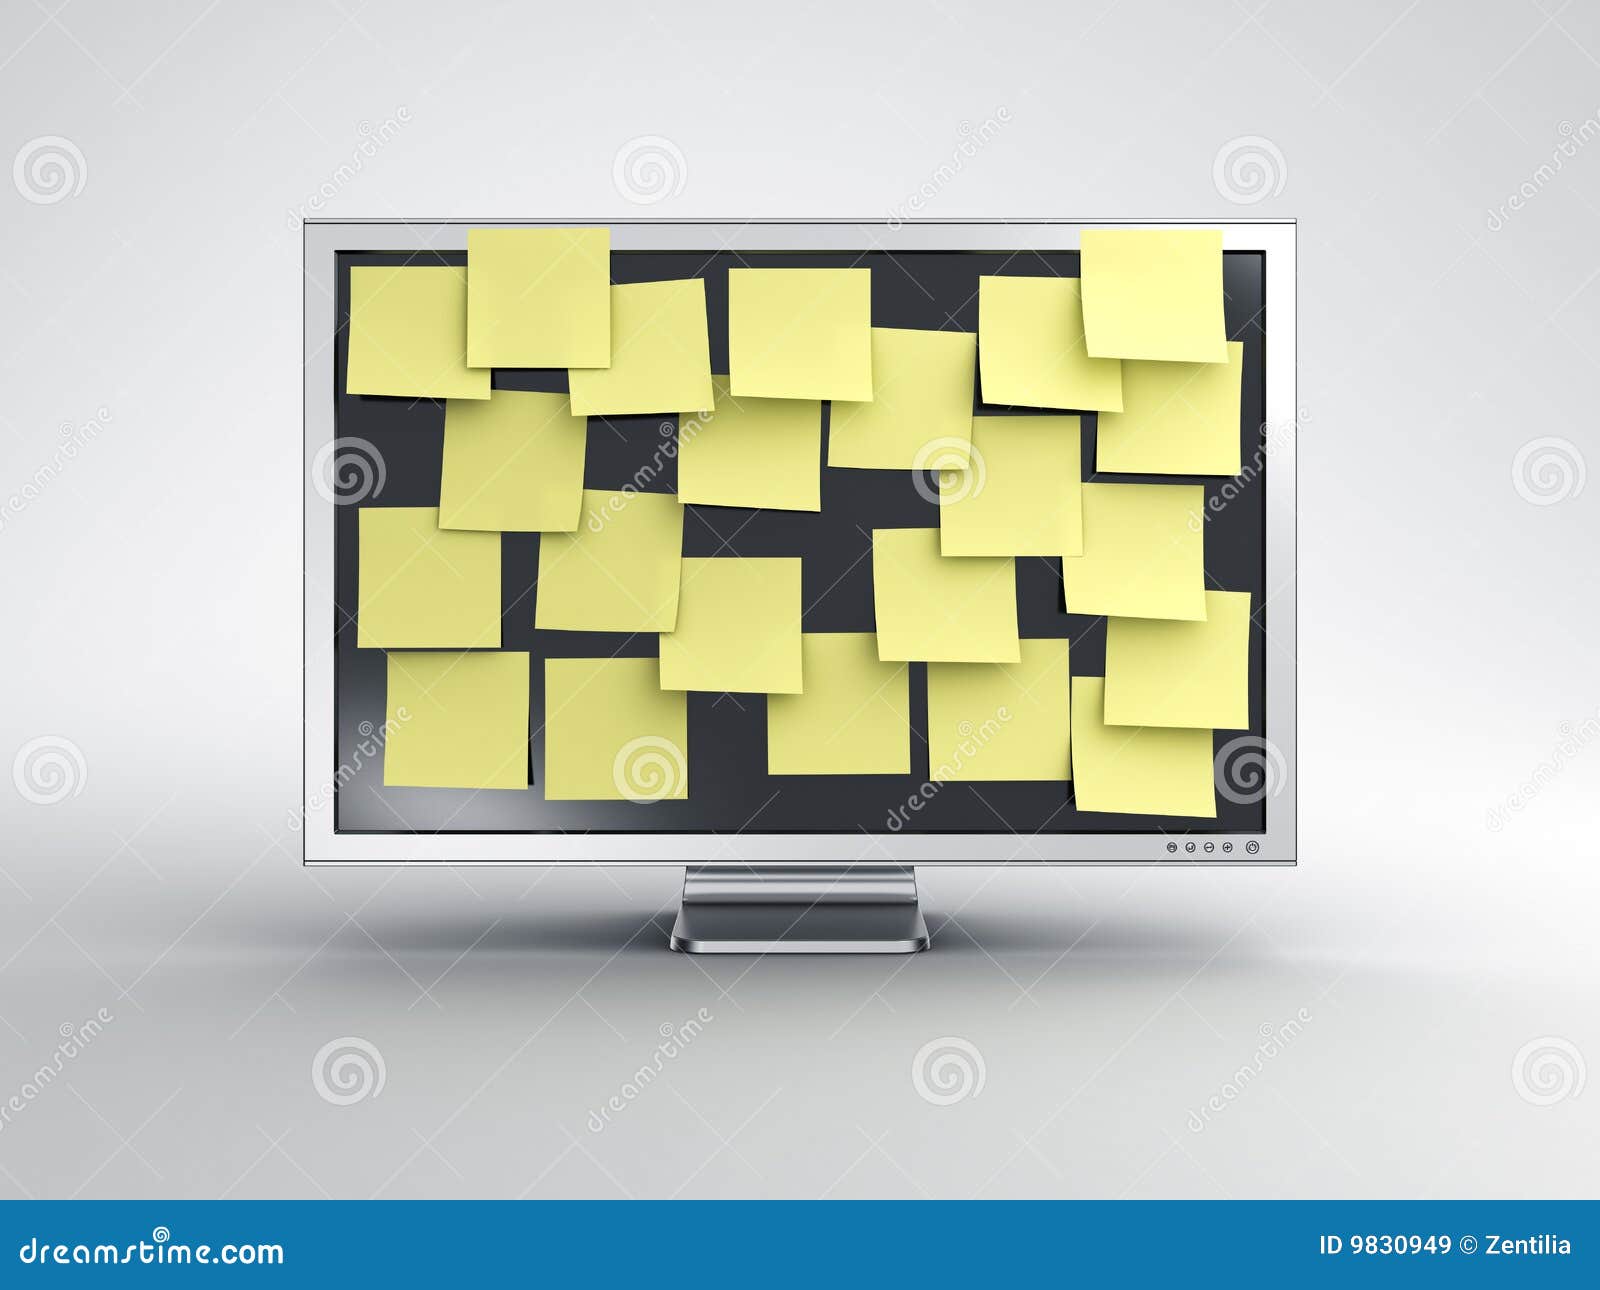 post its for computer screen